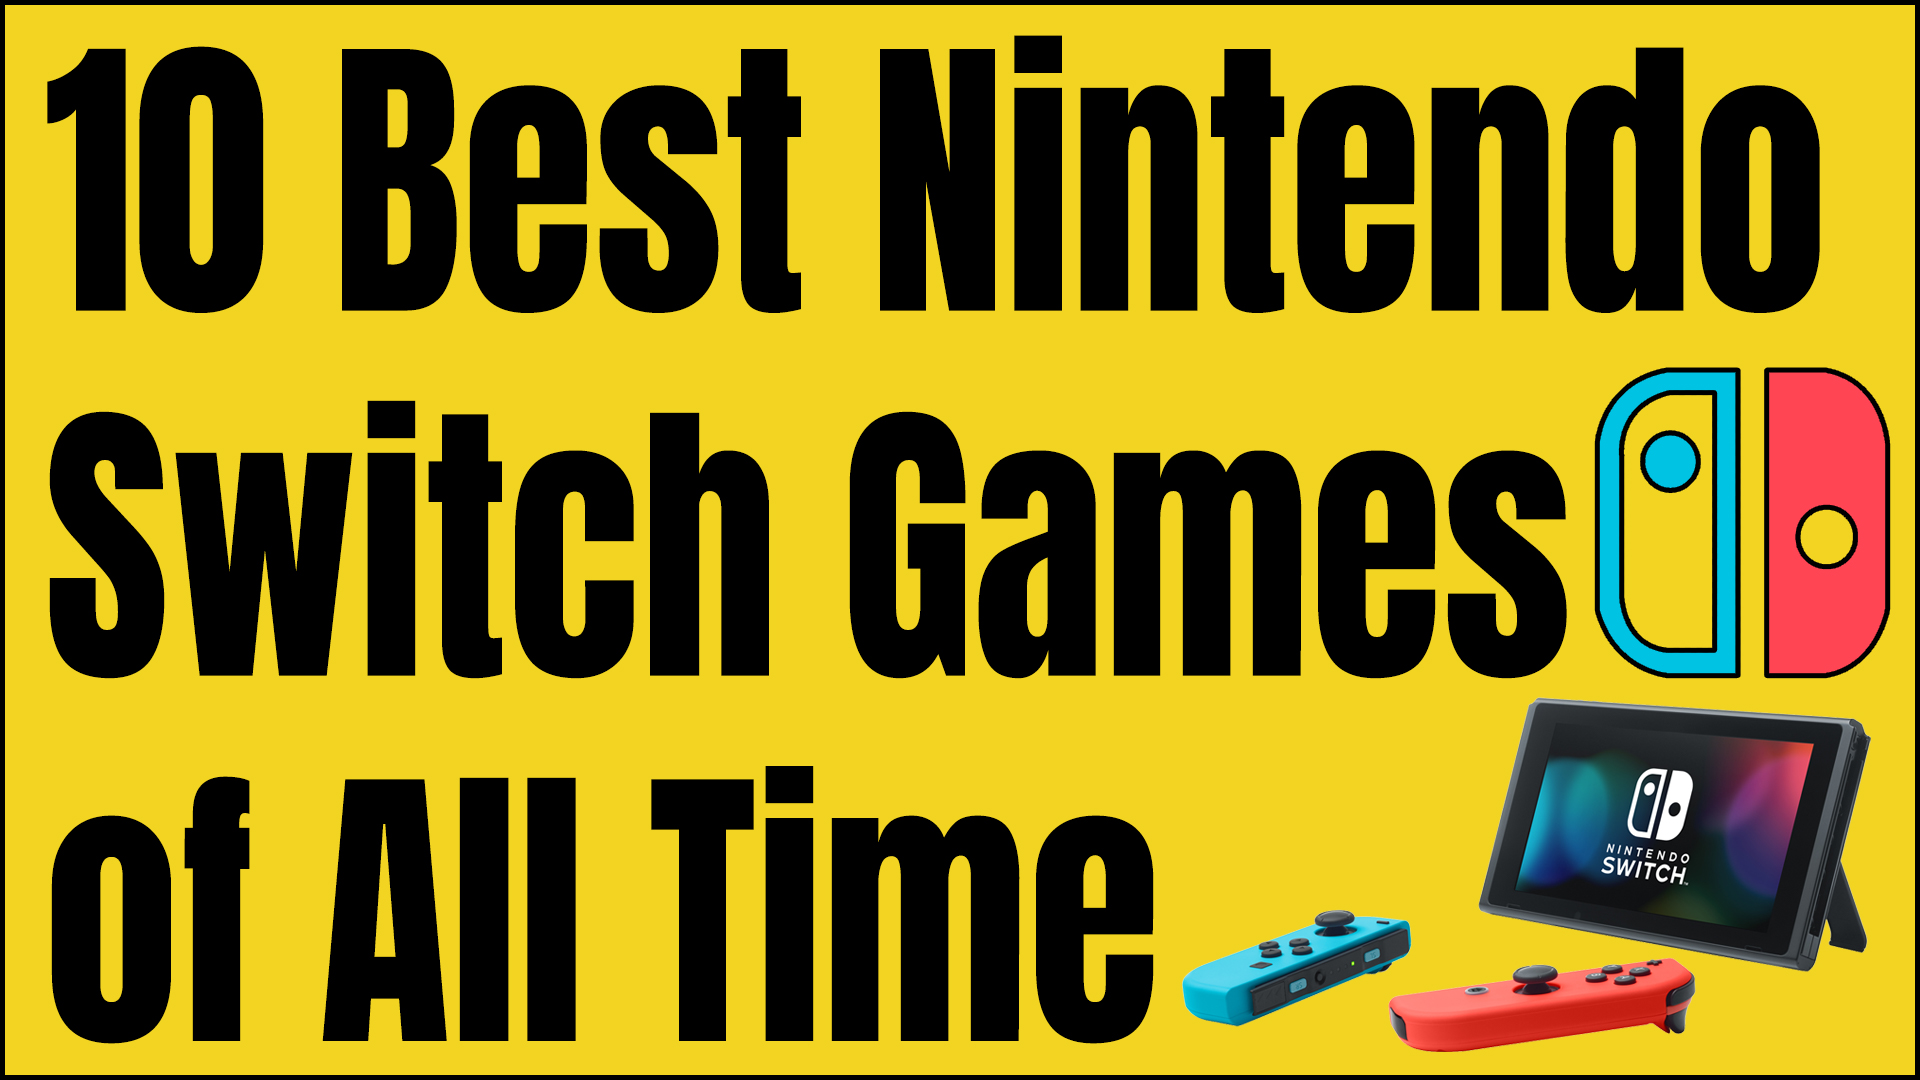 10 Best Nintendo Switch Games of All Time